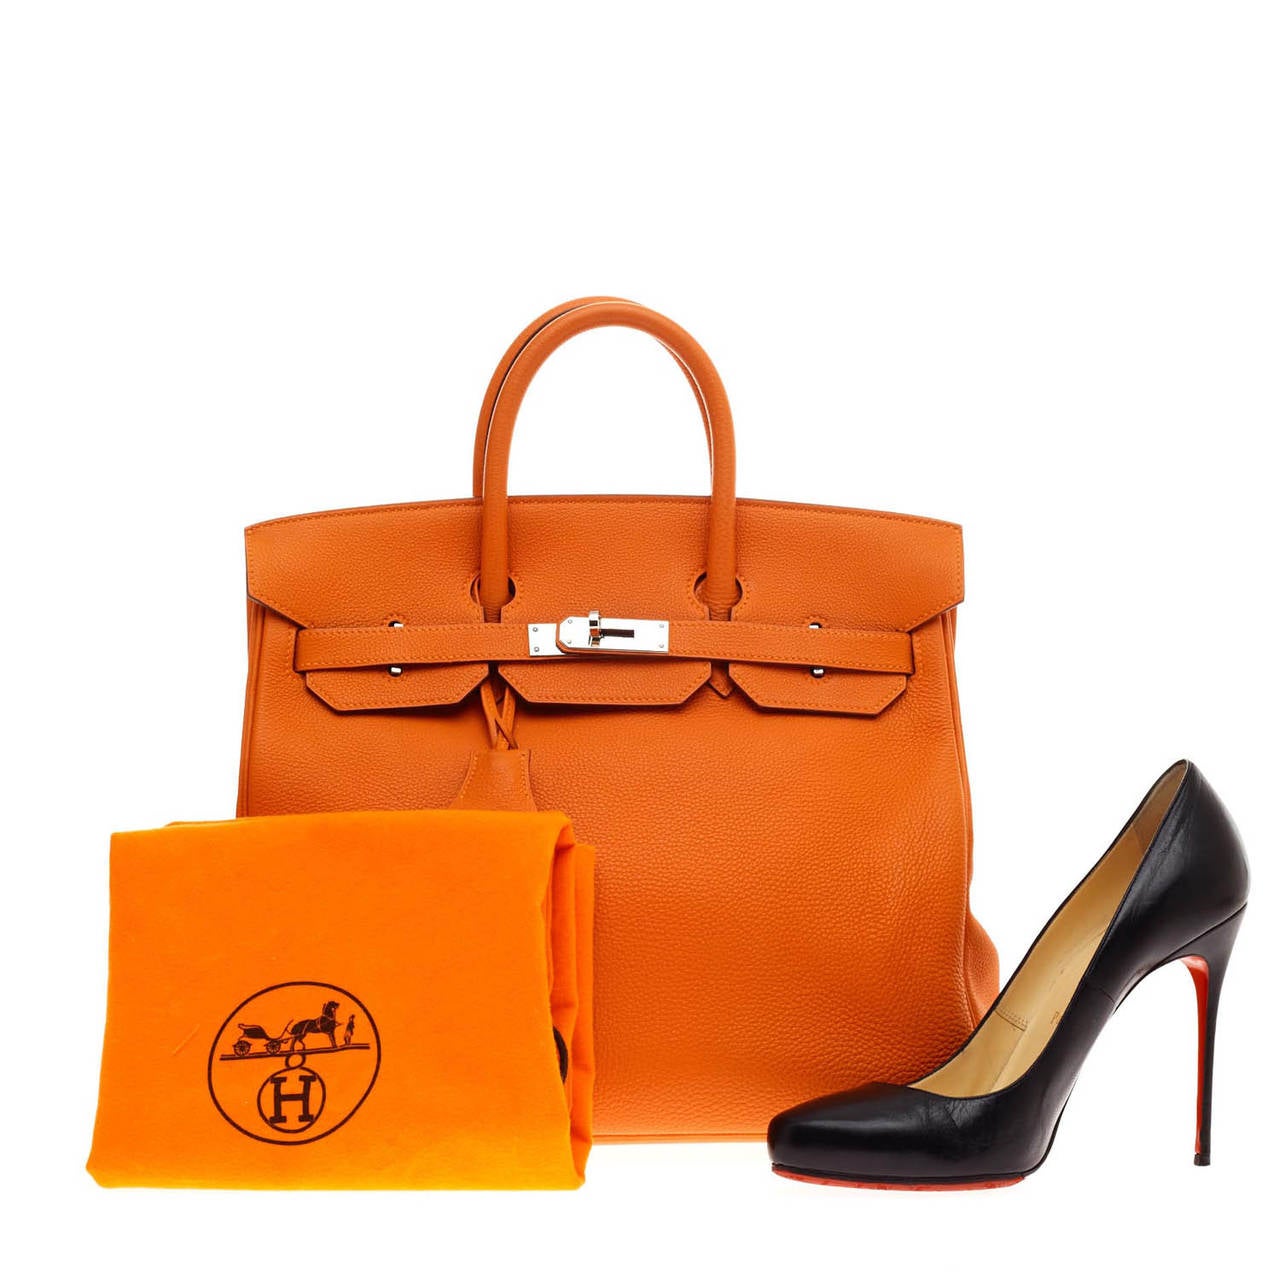 This authentic Hermes HAC Birkin Togo 32 in vibrant Orange is synonymous to traditional Hermes luxury. The HAC, modeled after regular Birkins stands at taller proportions with slightly shorter handles giving it its own distinct style. Accented with